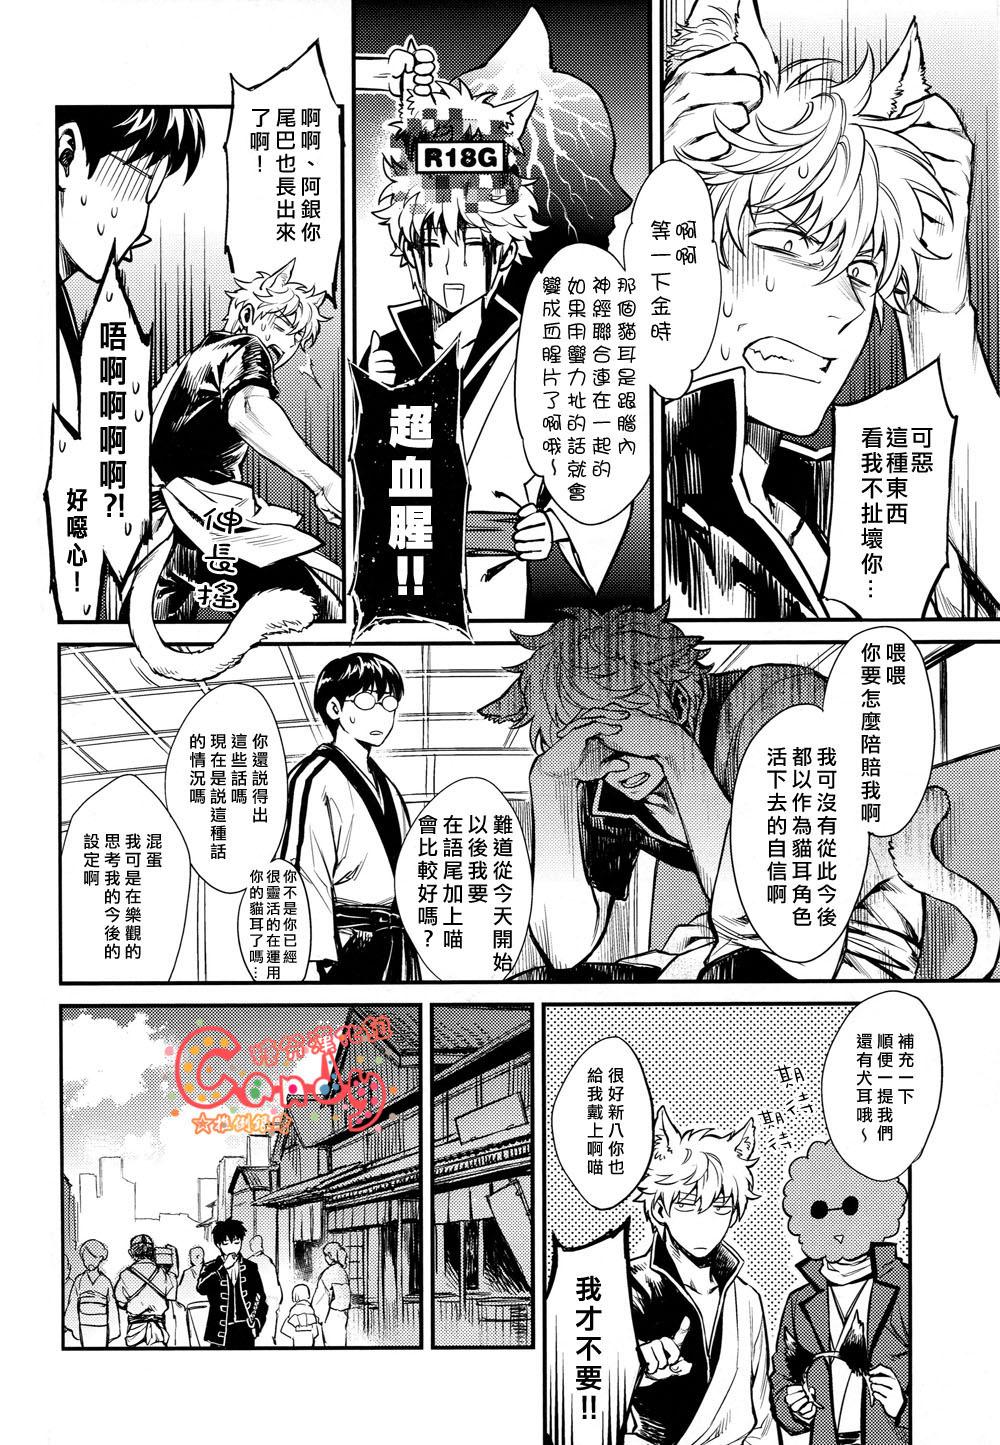 Cums Like cat and dog - Gintama Metendo - Page 7